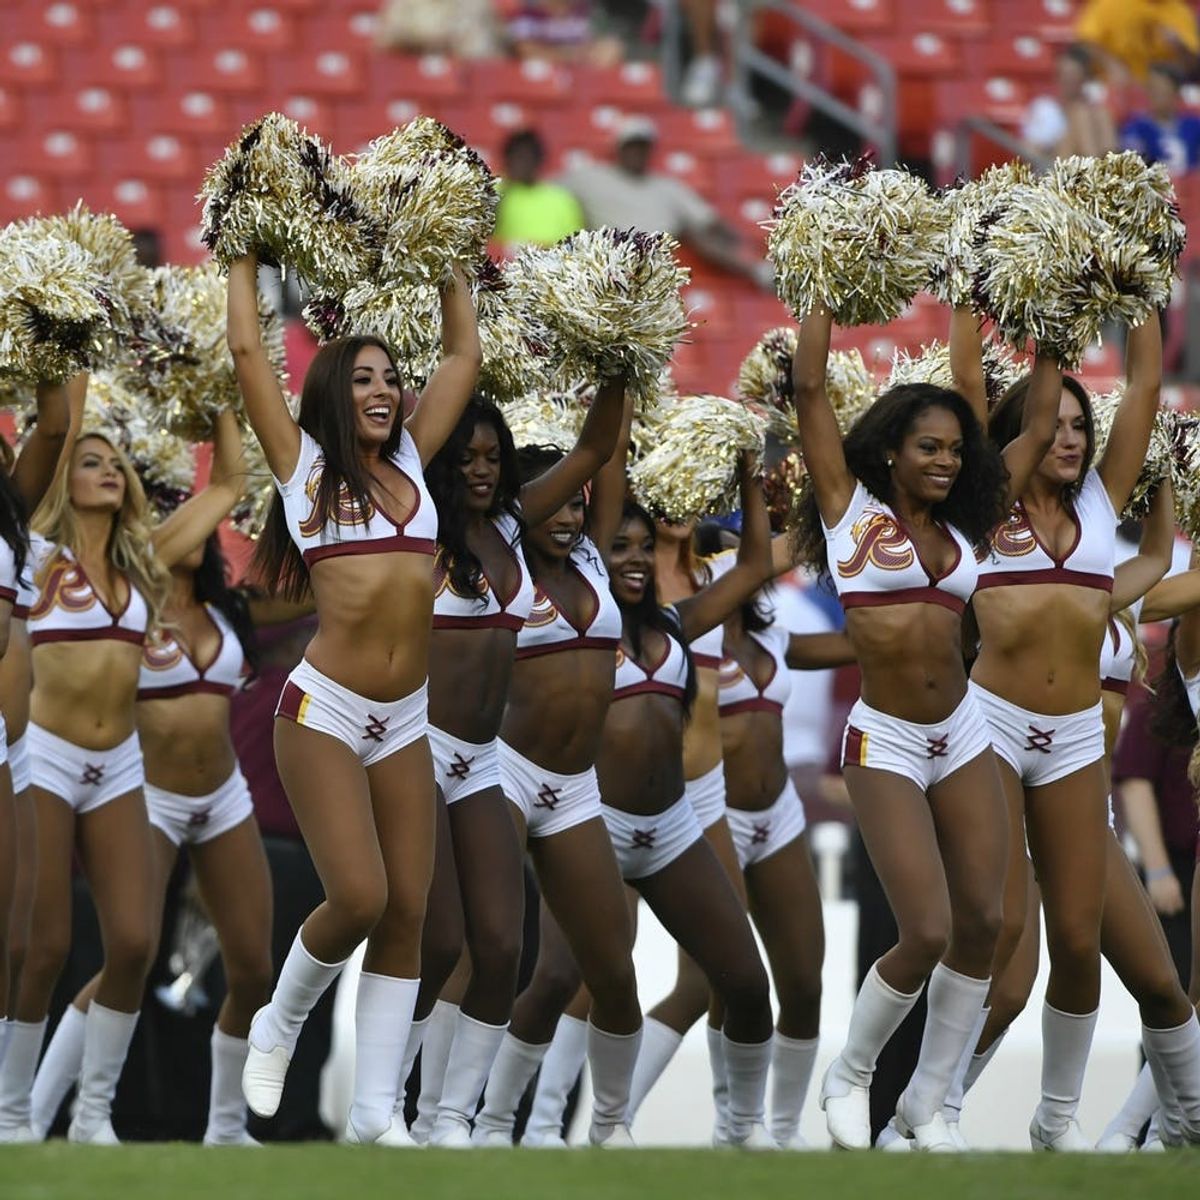 Former Washington Redskins Cheerleaders Have Defended the Organization Amid Claims of Sexual Misconduct